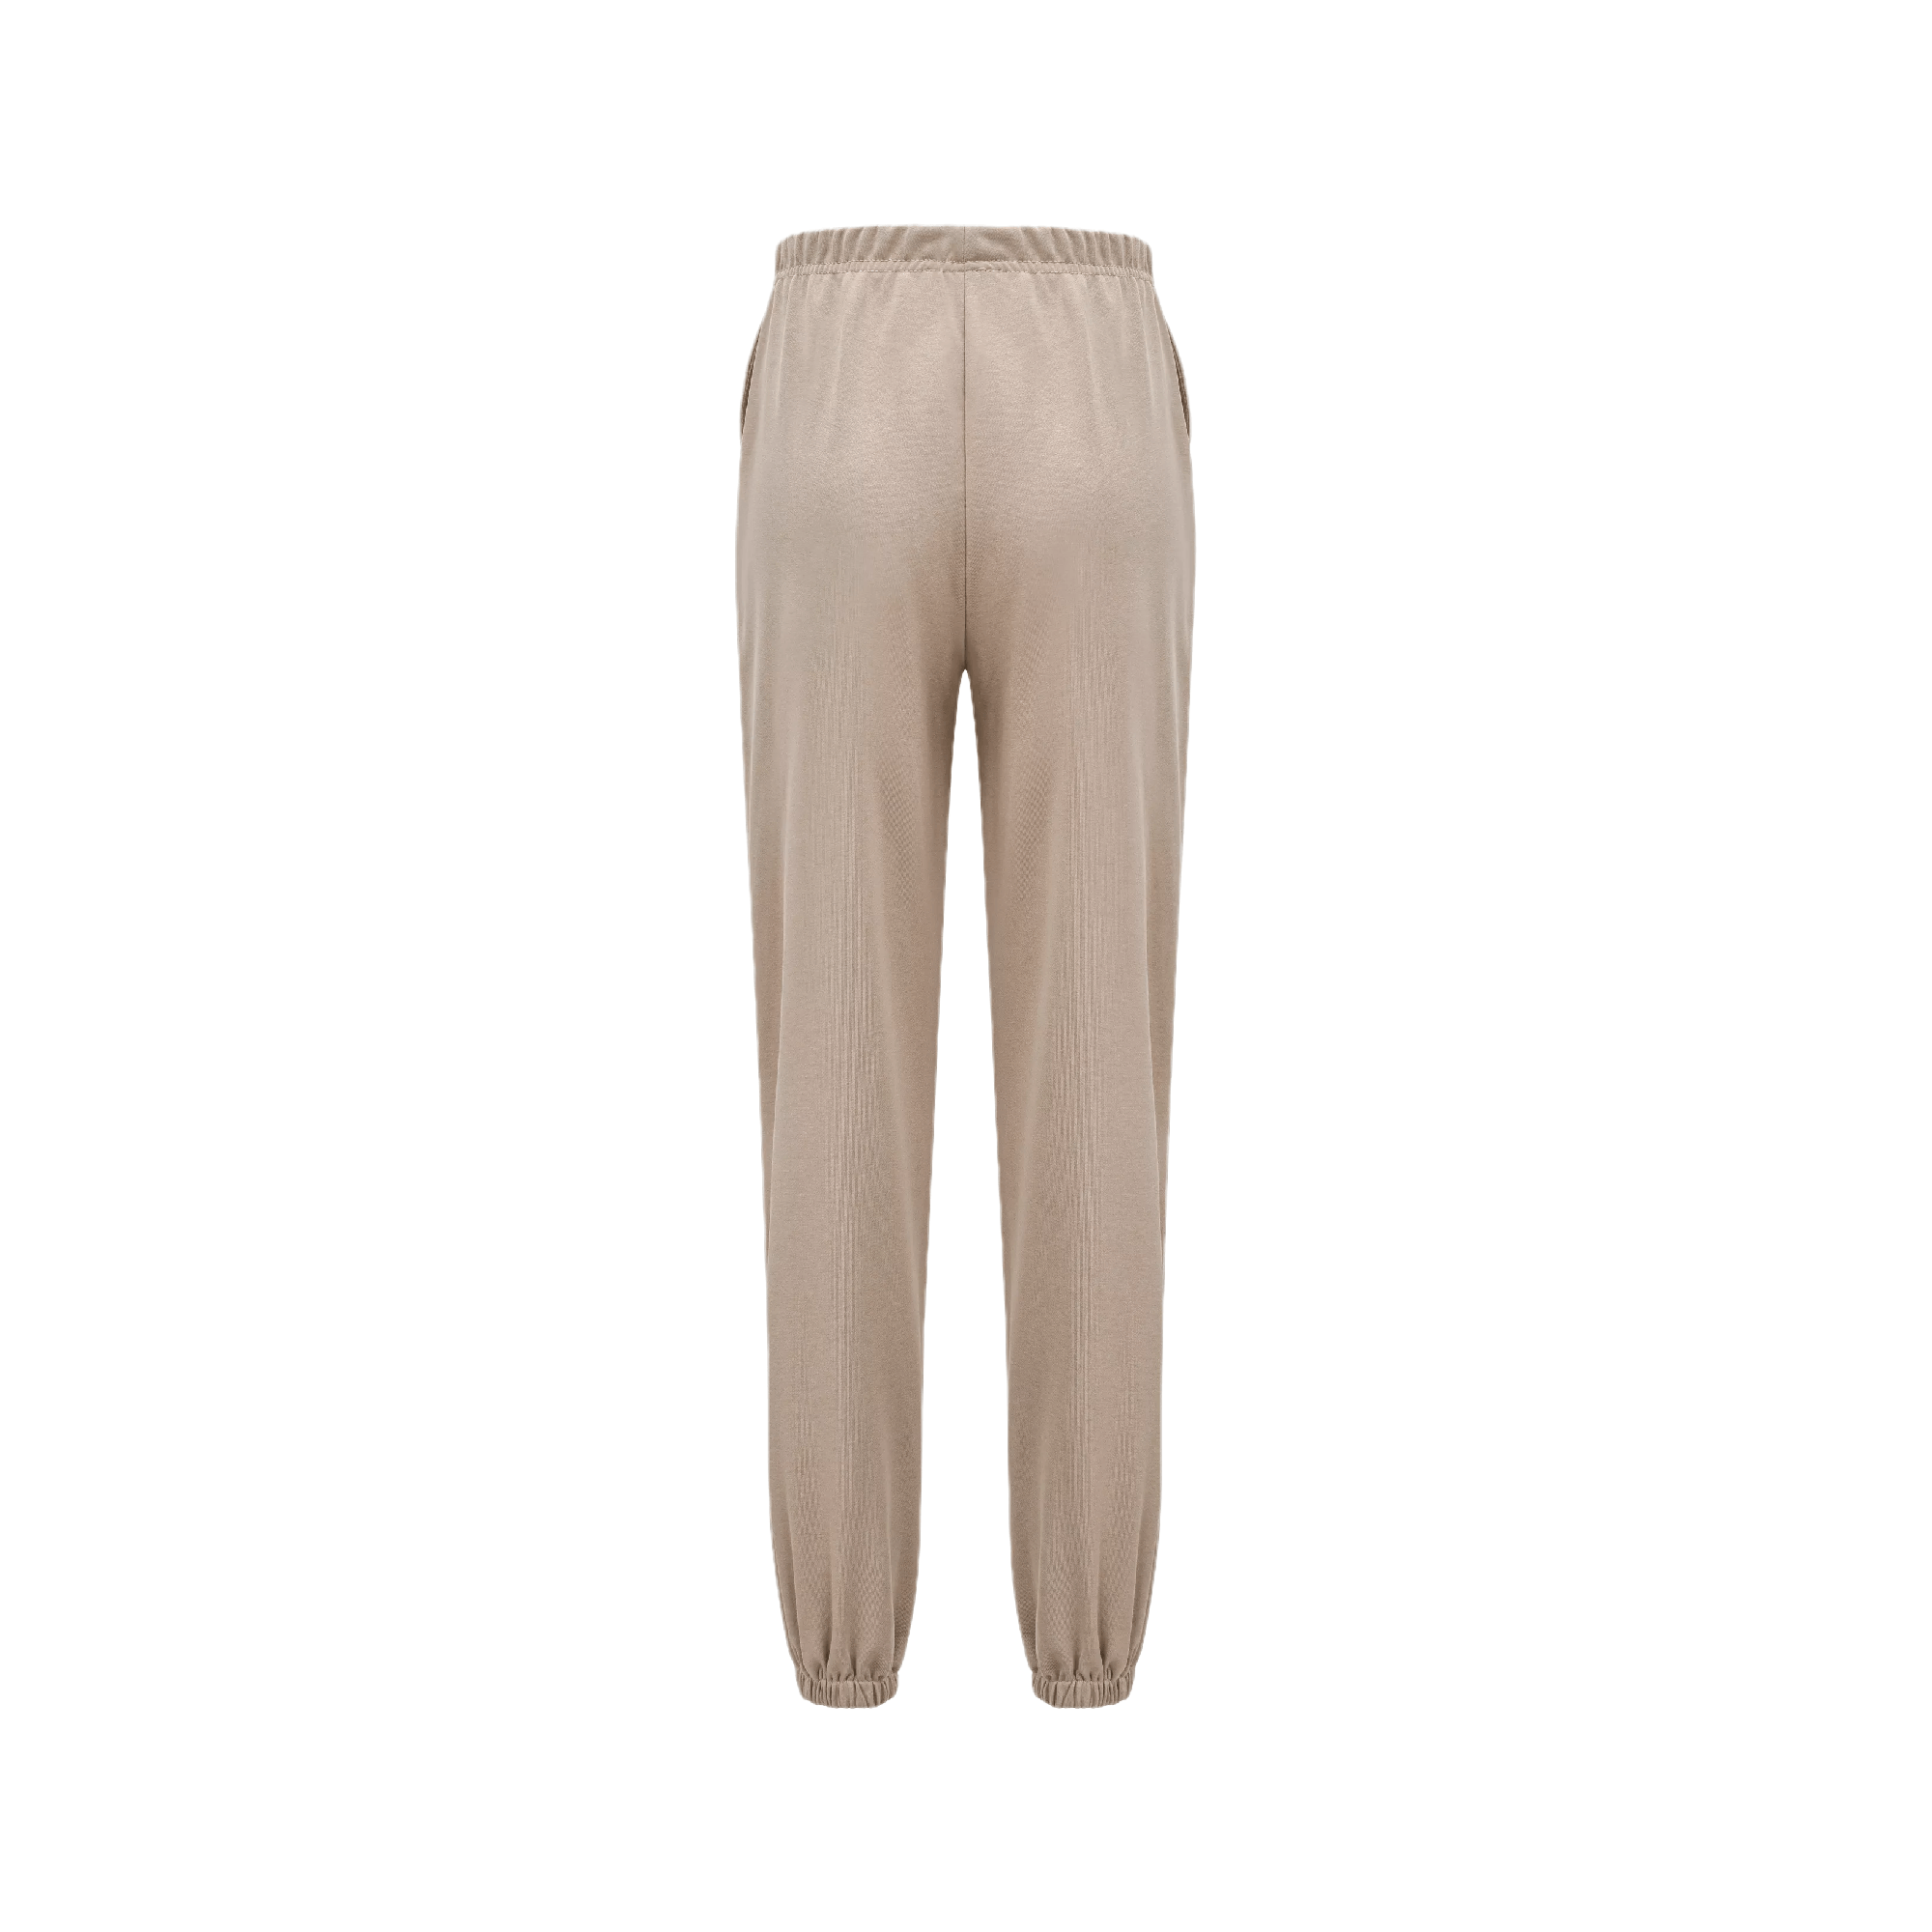 Eleven-performance track pants - itsy, it‘z different